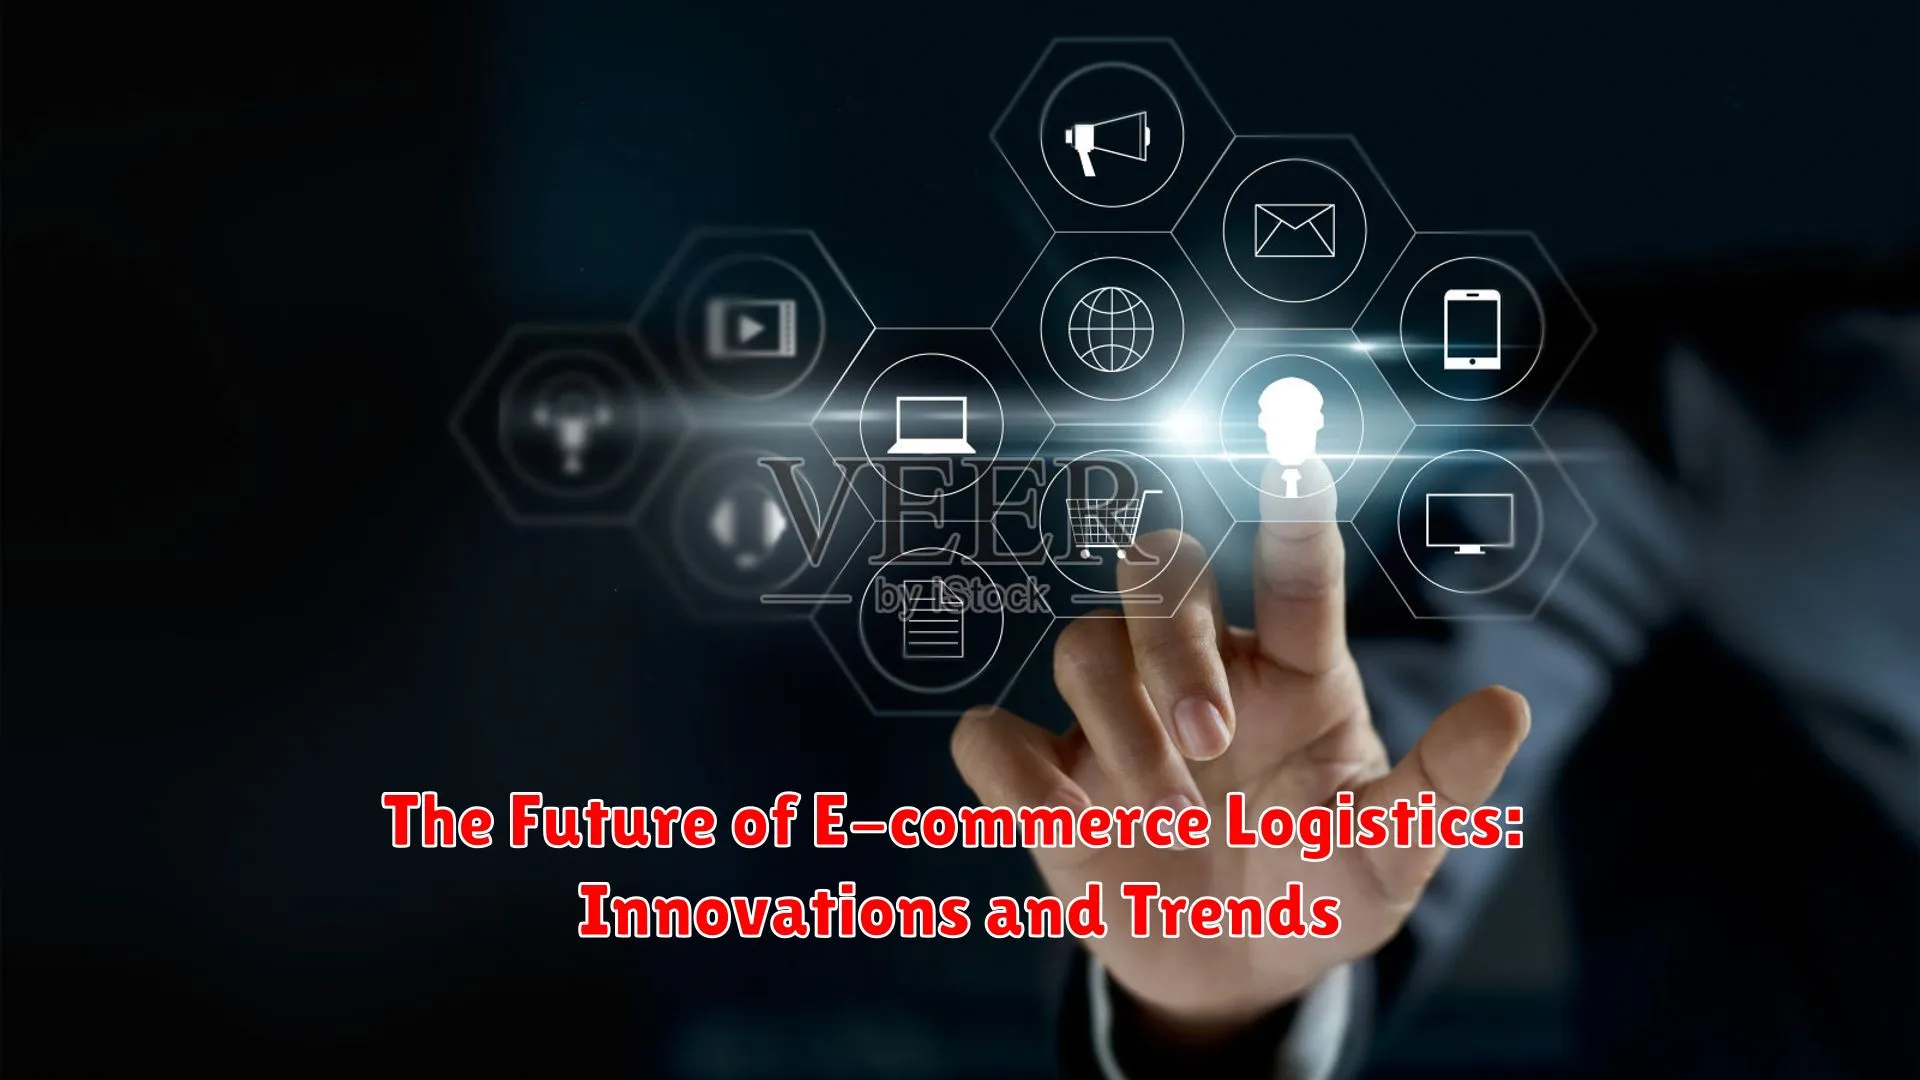 The Future of E-commerce Logistics: Innovations and Trends